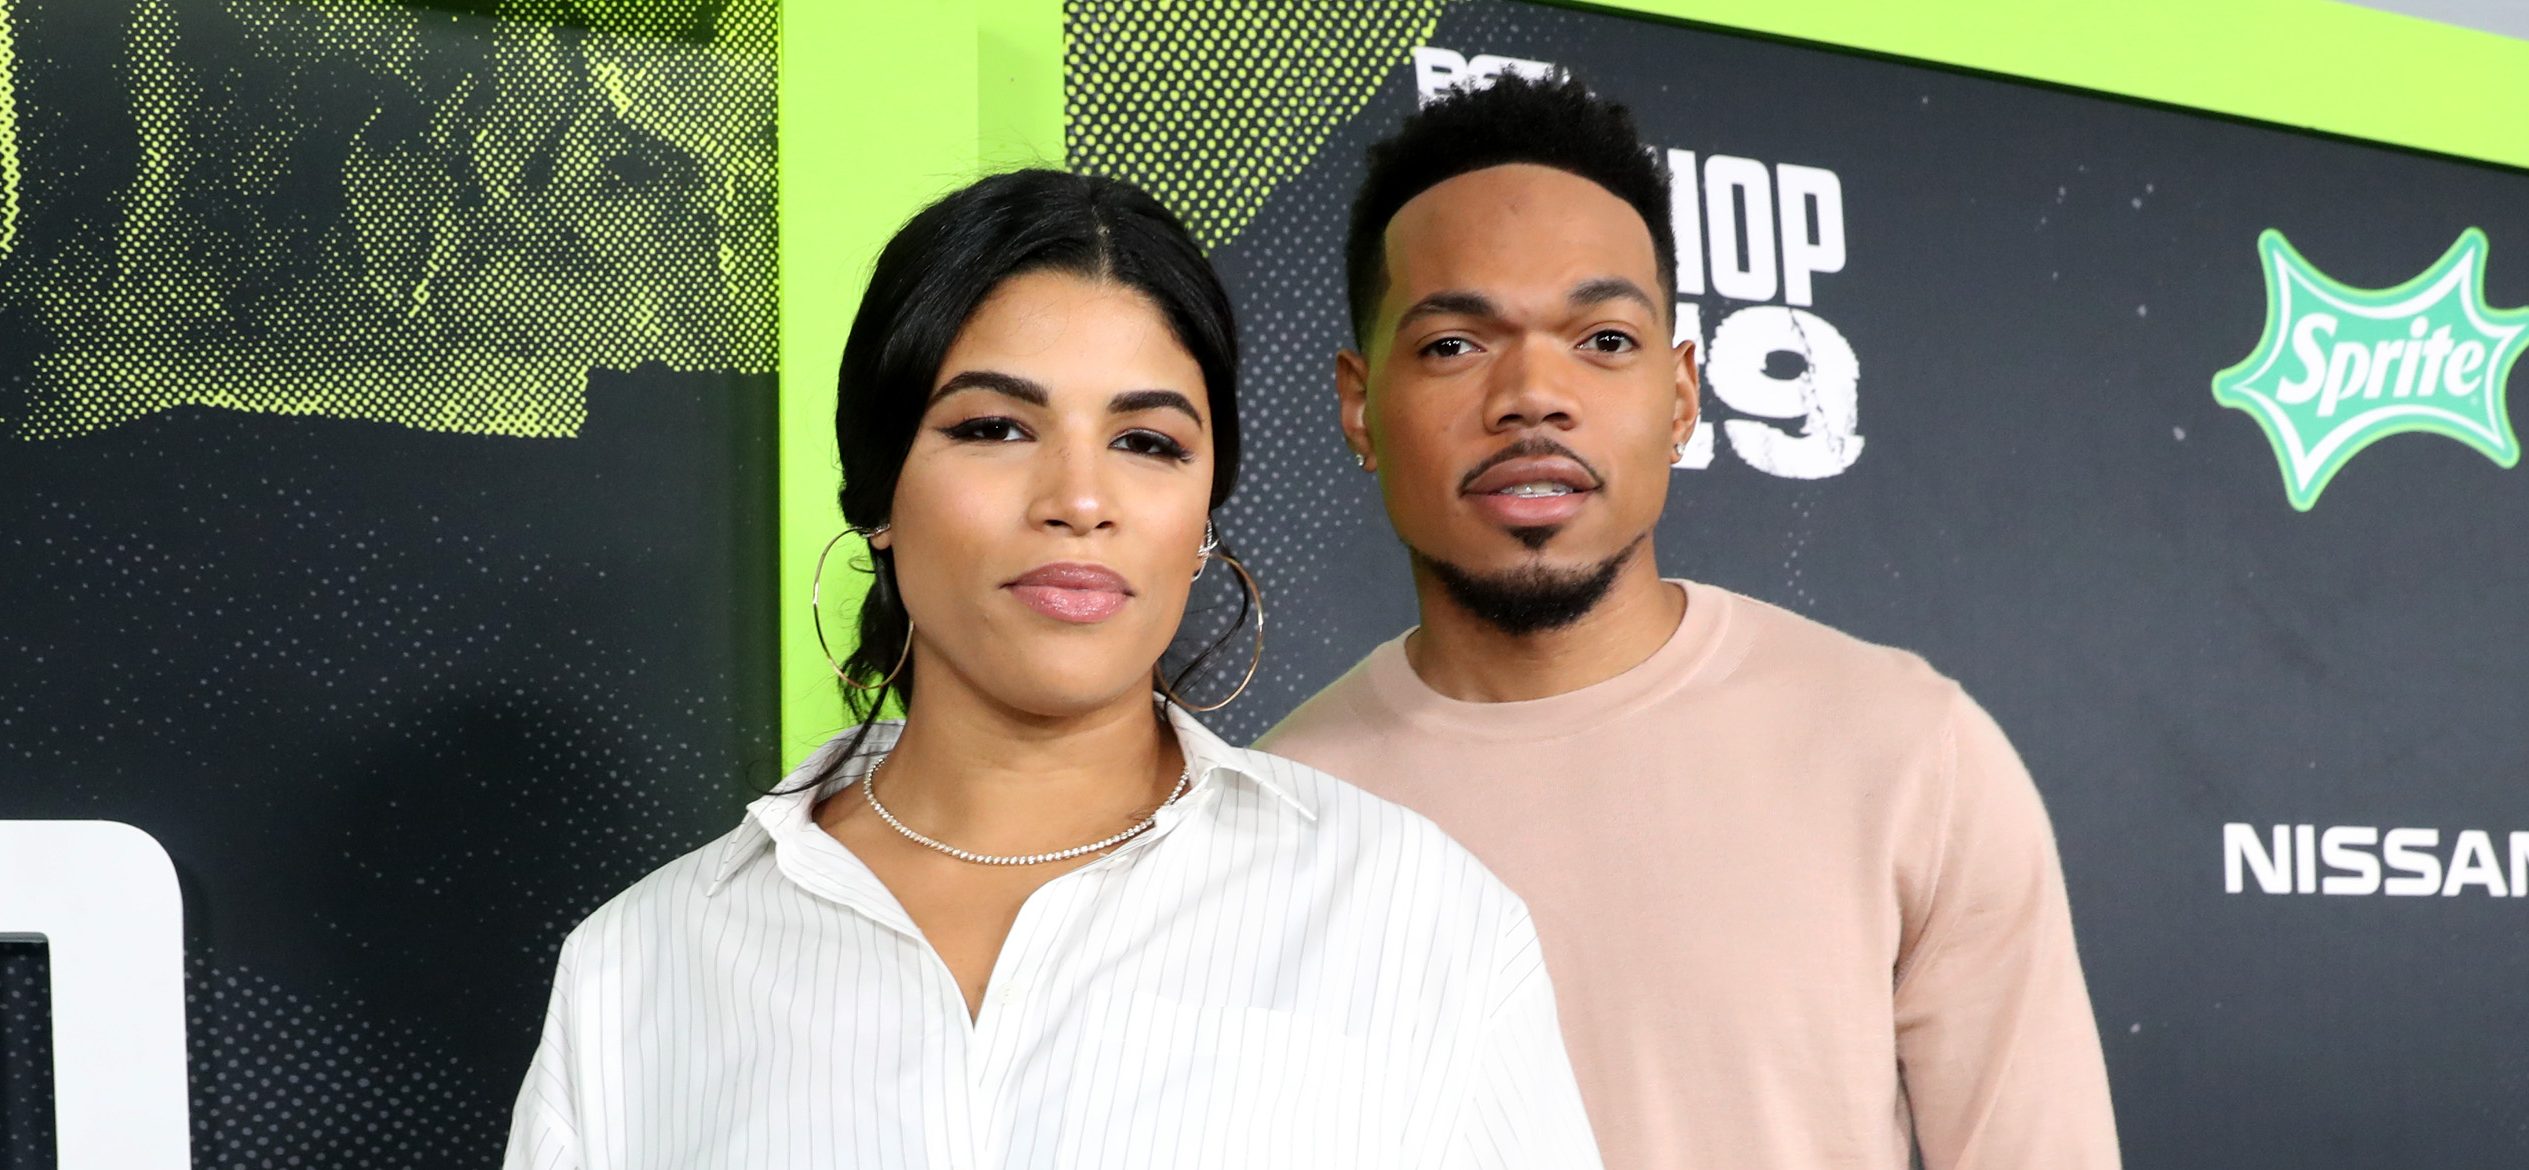 Chance The Rapper Seemingly Responds To Wife’s Message On Instagram